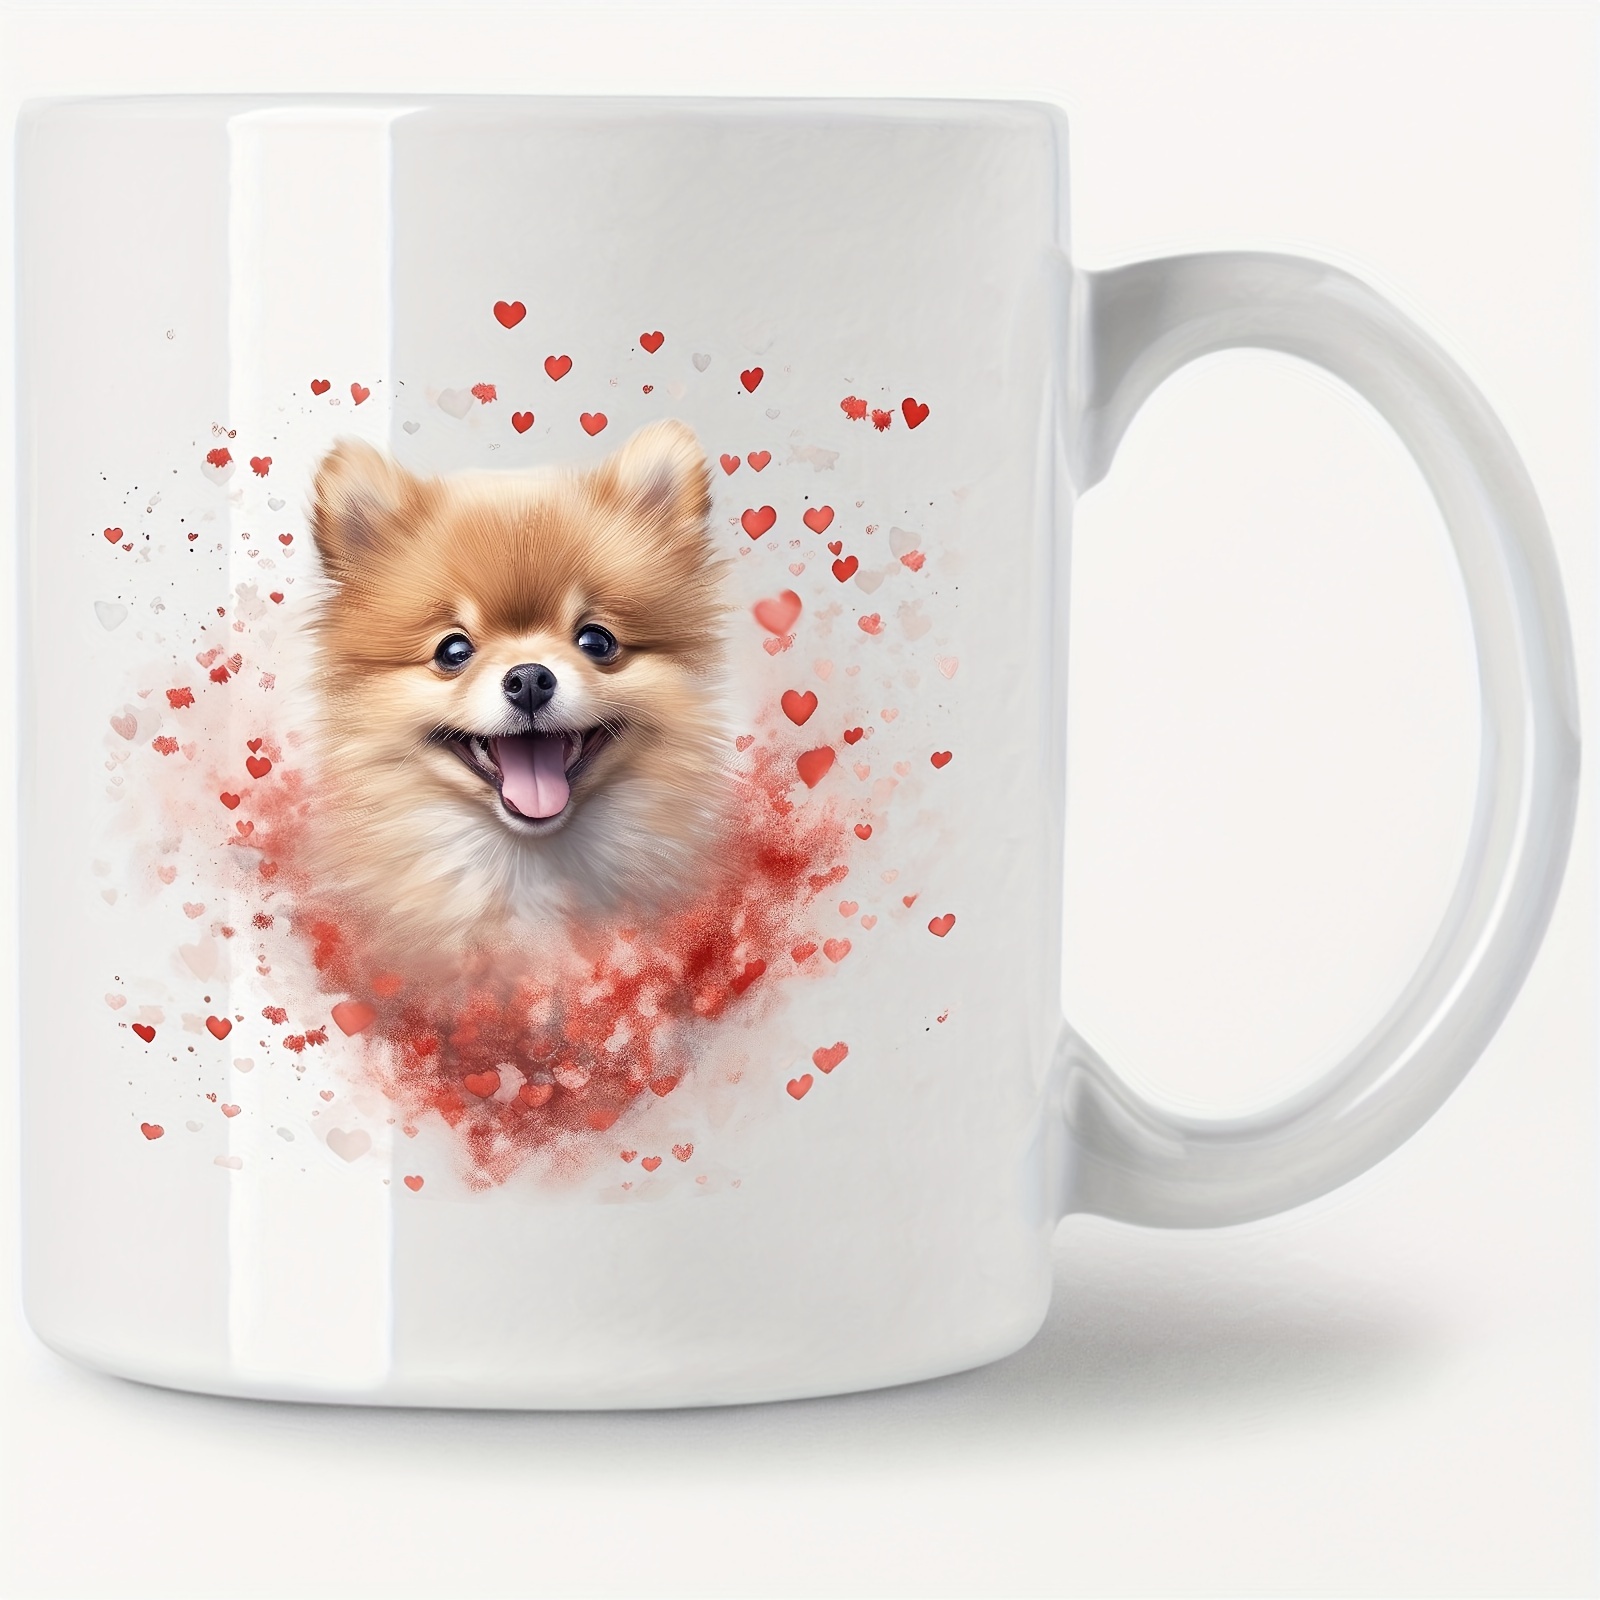 

Pomeranian Dog Ceramic Coffee Mug 11oz - Dishwasher & Microwave Safe, Double-sided Design - Ideal Gift For Pet Lovers, Office Colleagues, Friends & Family